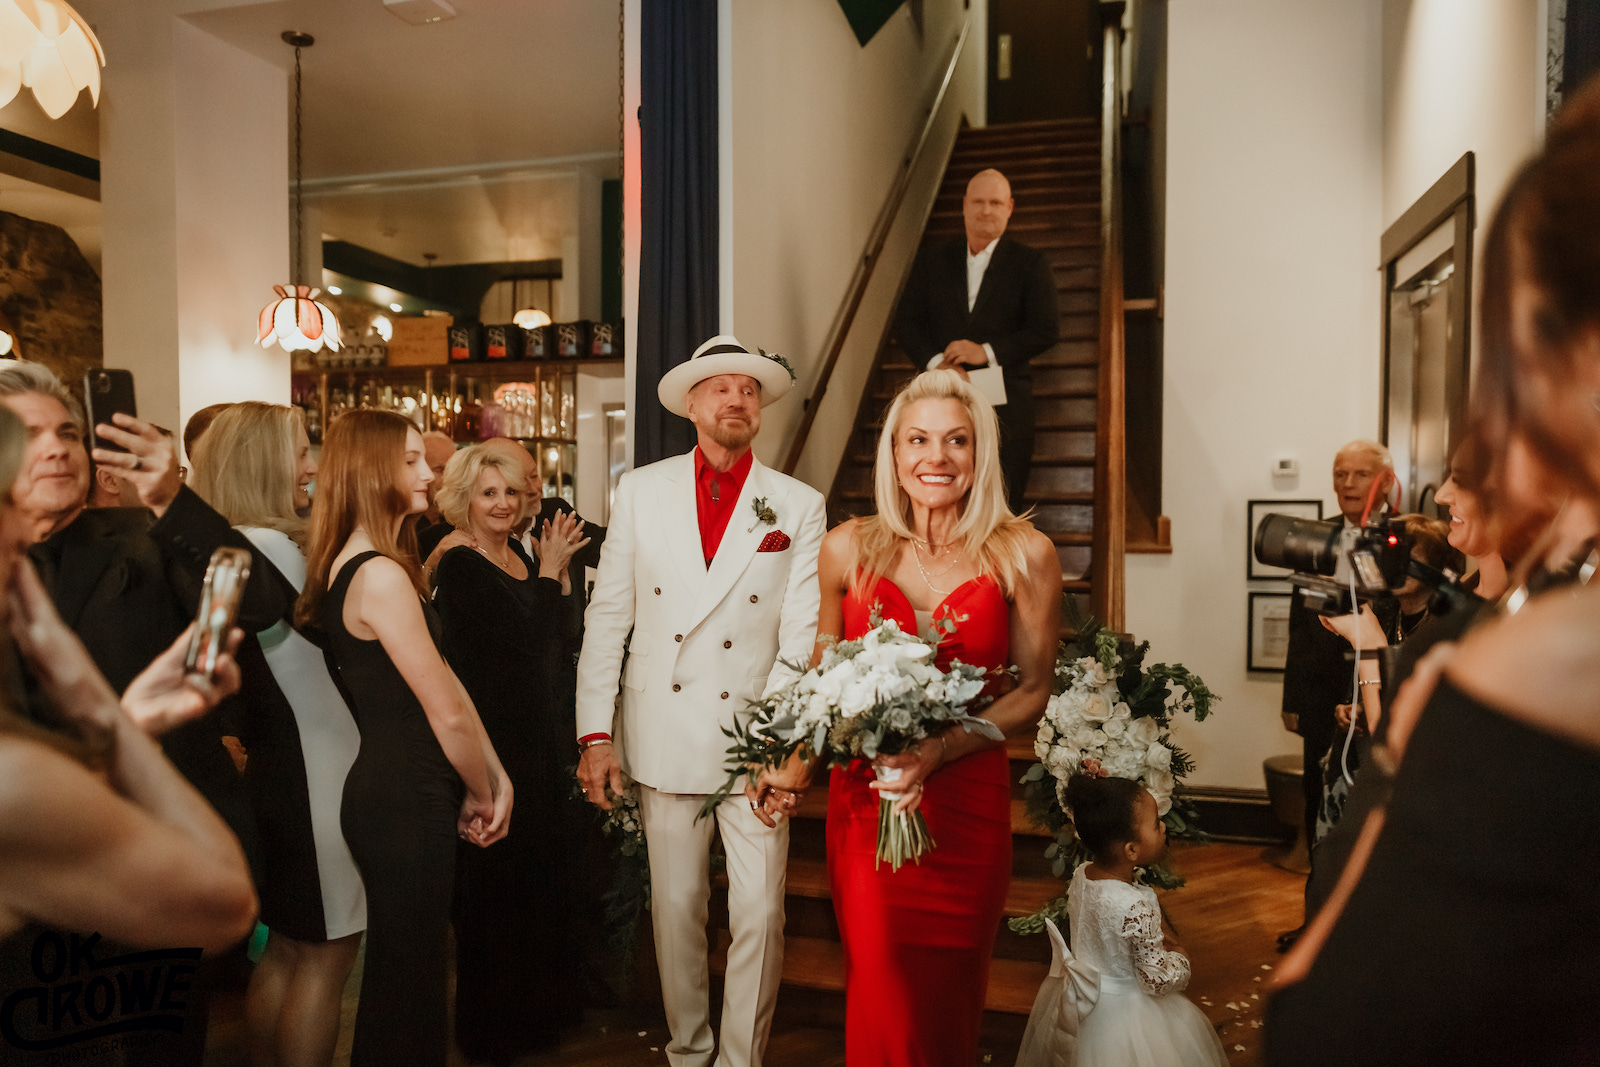 Diamond Dallas Page's surprise wedding to Payge McMahon at The Dwell Hotel in downtown Chattanooga